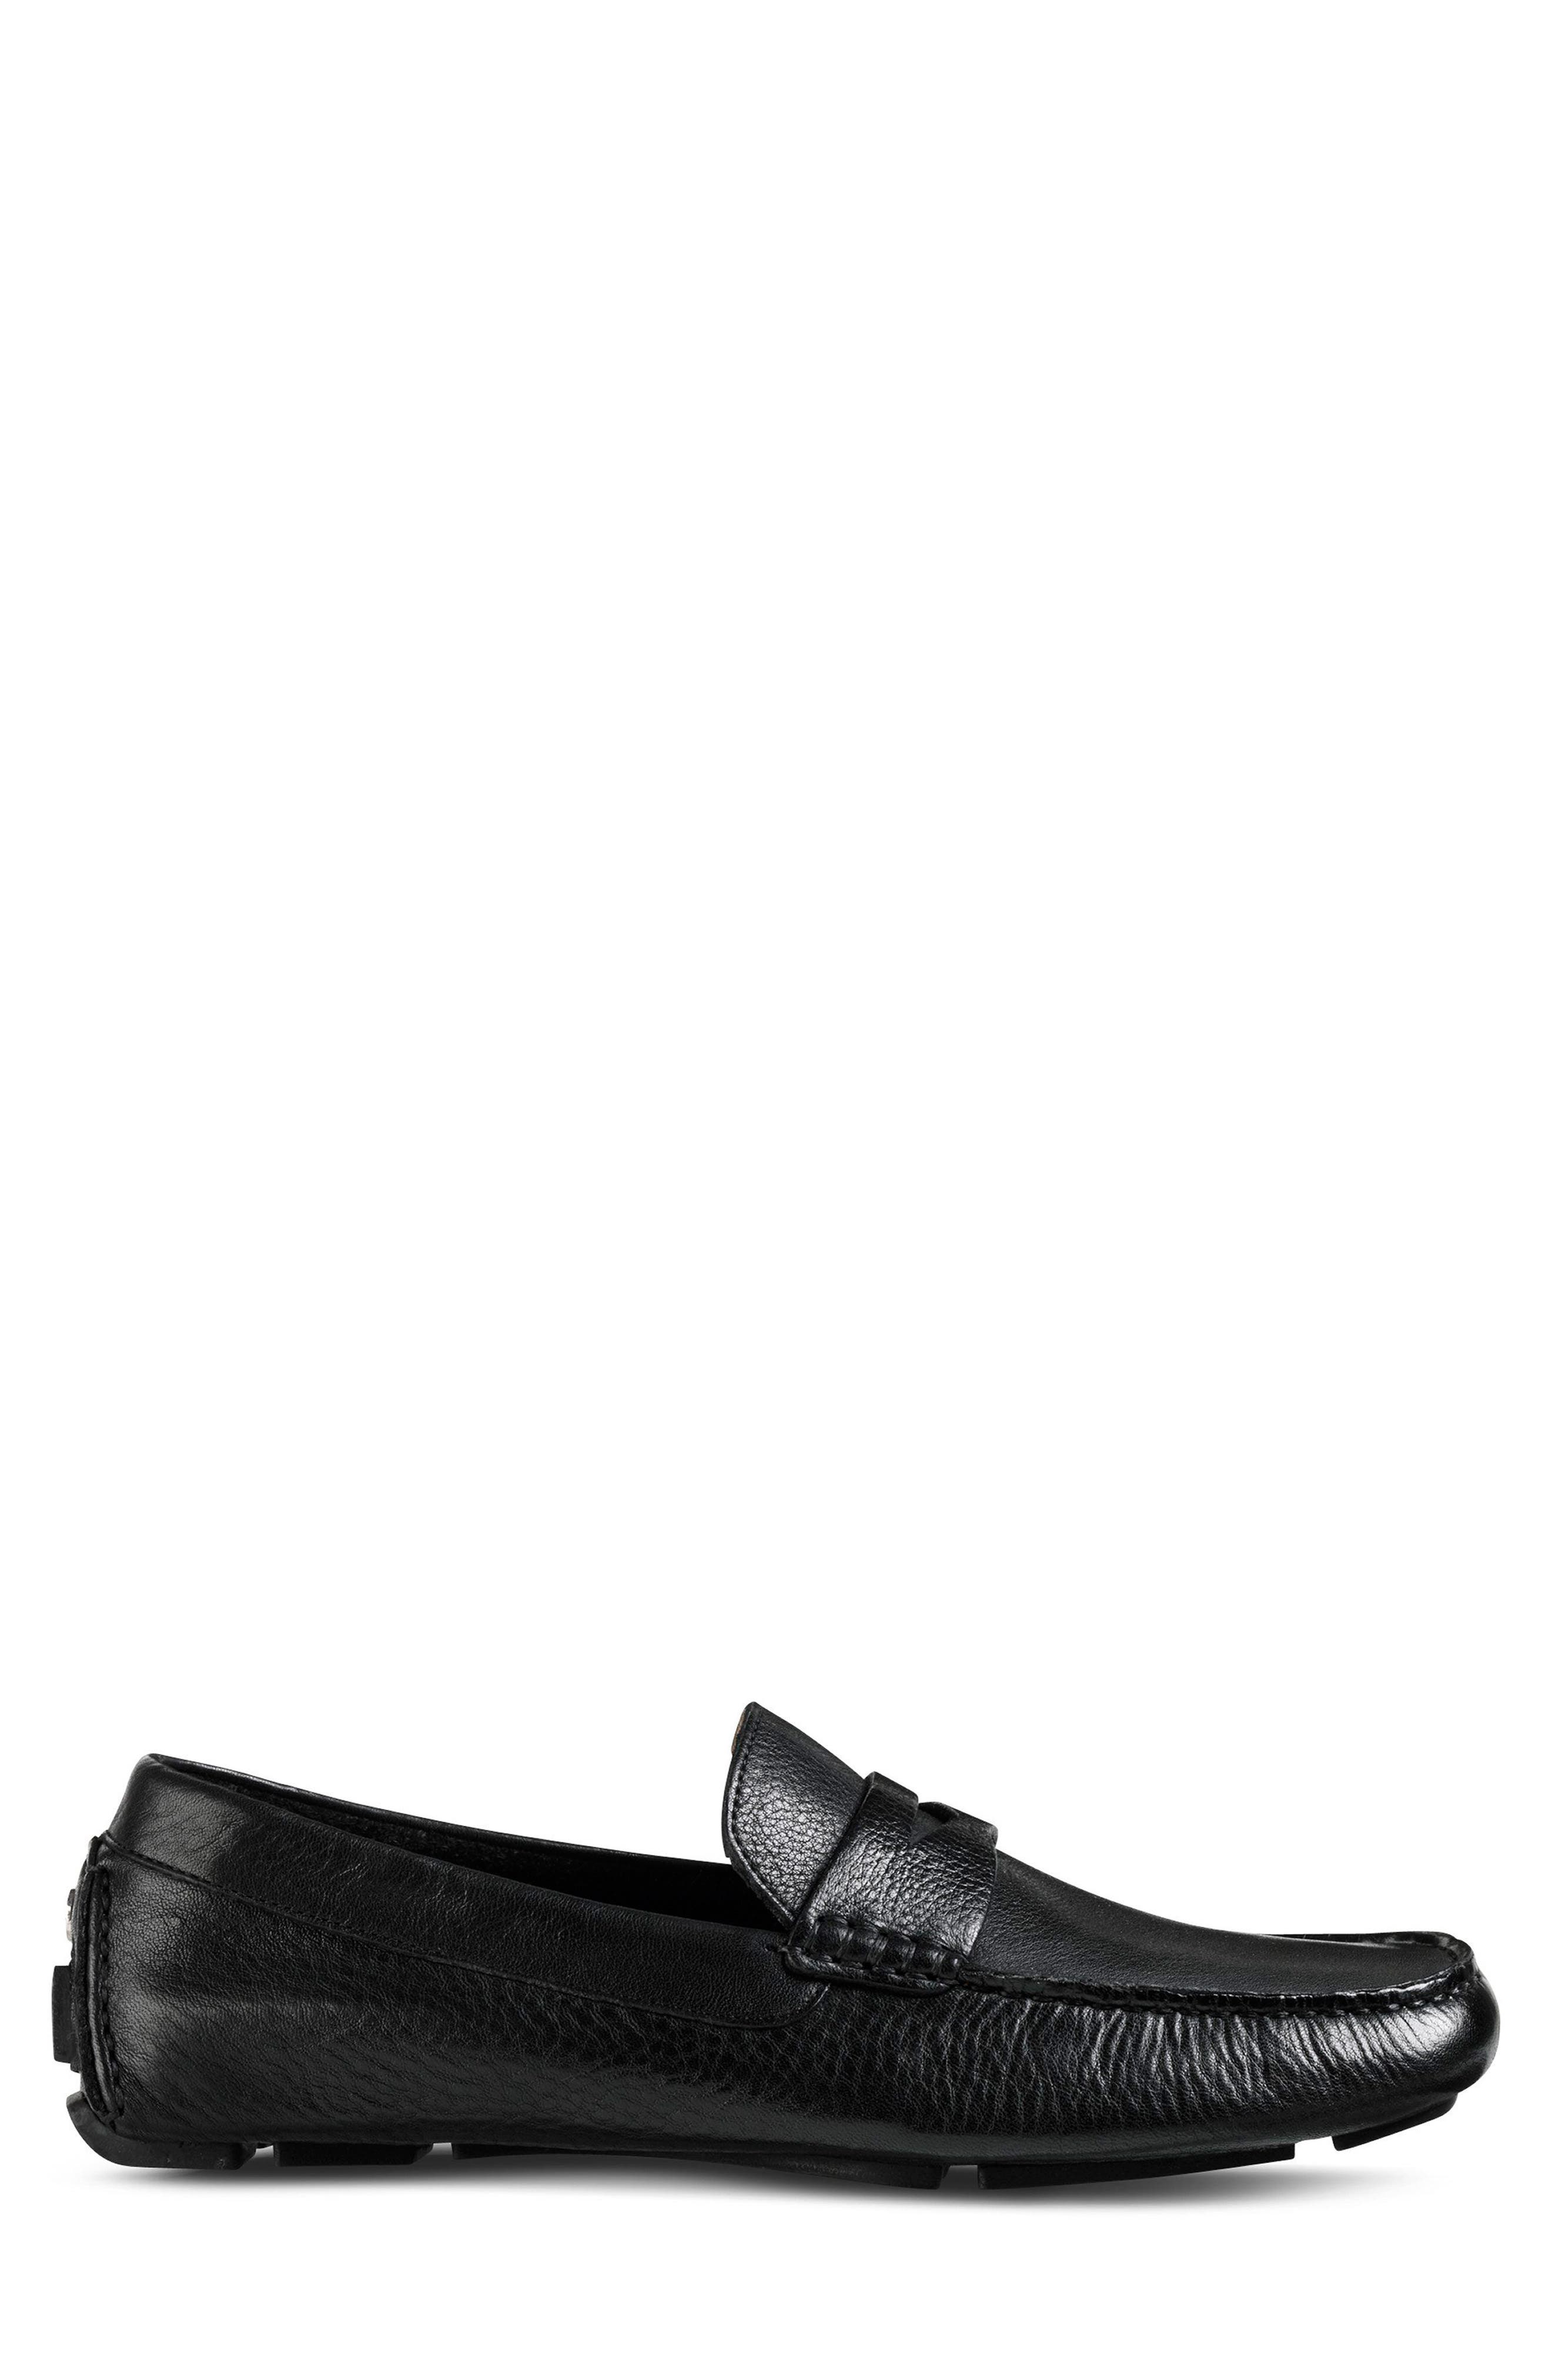 Cole Haan Men's Howland Leather Slip-On Penny Loafers Black 